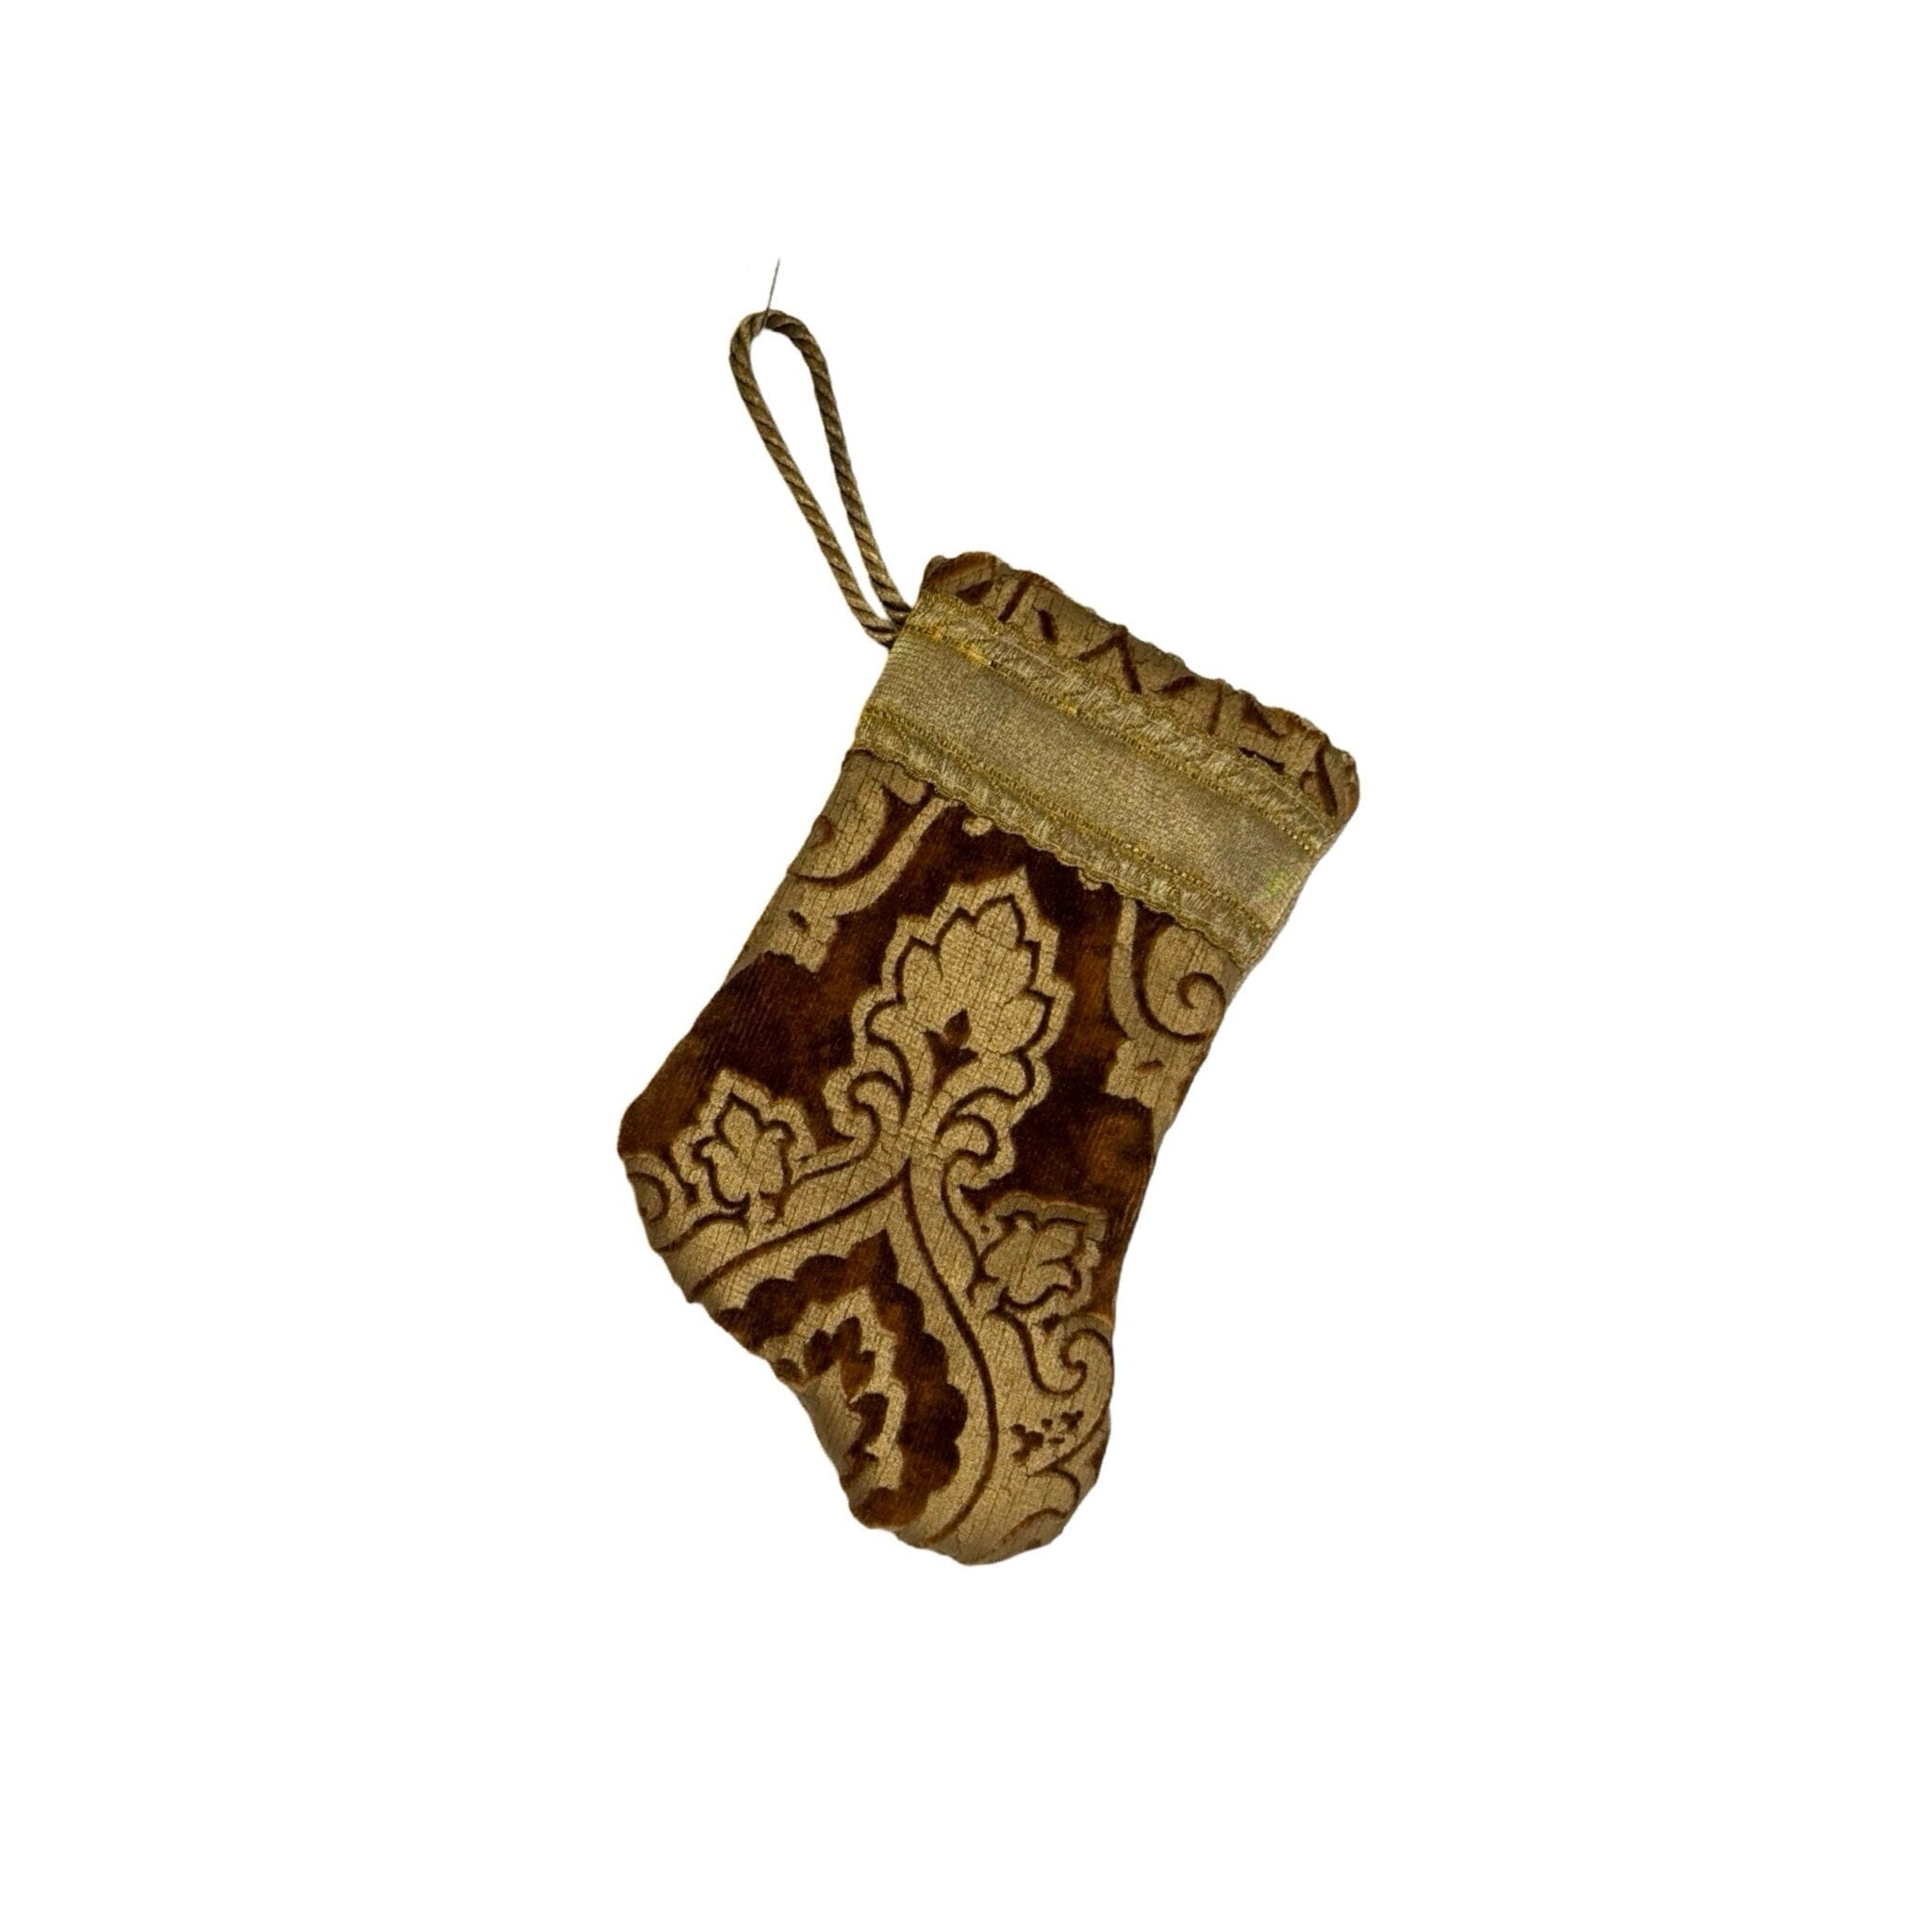 Handmade Mini Stocking Made From Vintage Fabric and Trims- Brown and Gold Ornament B. Viz Design E 